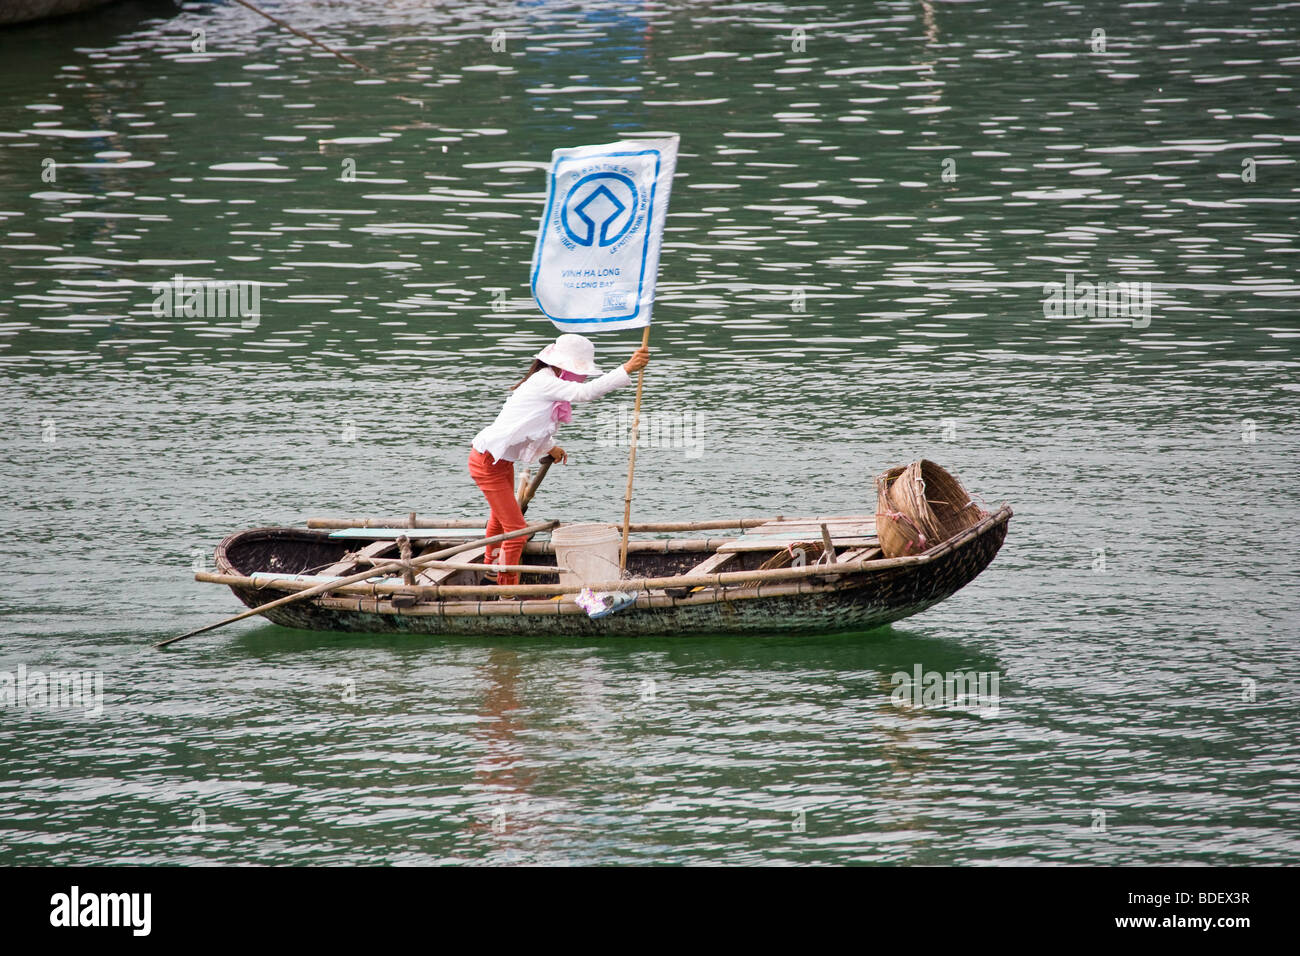 Local woman using a rice sack as a sail for a small boat in Ha Long Bay, Vietnam Stock Photo